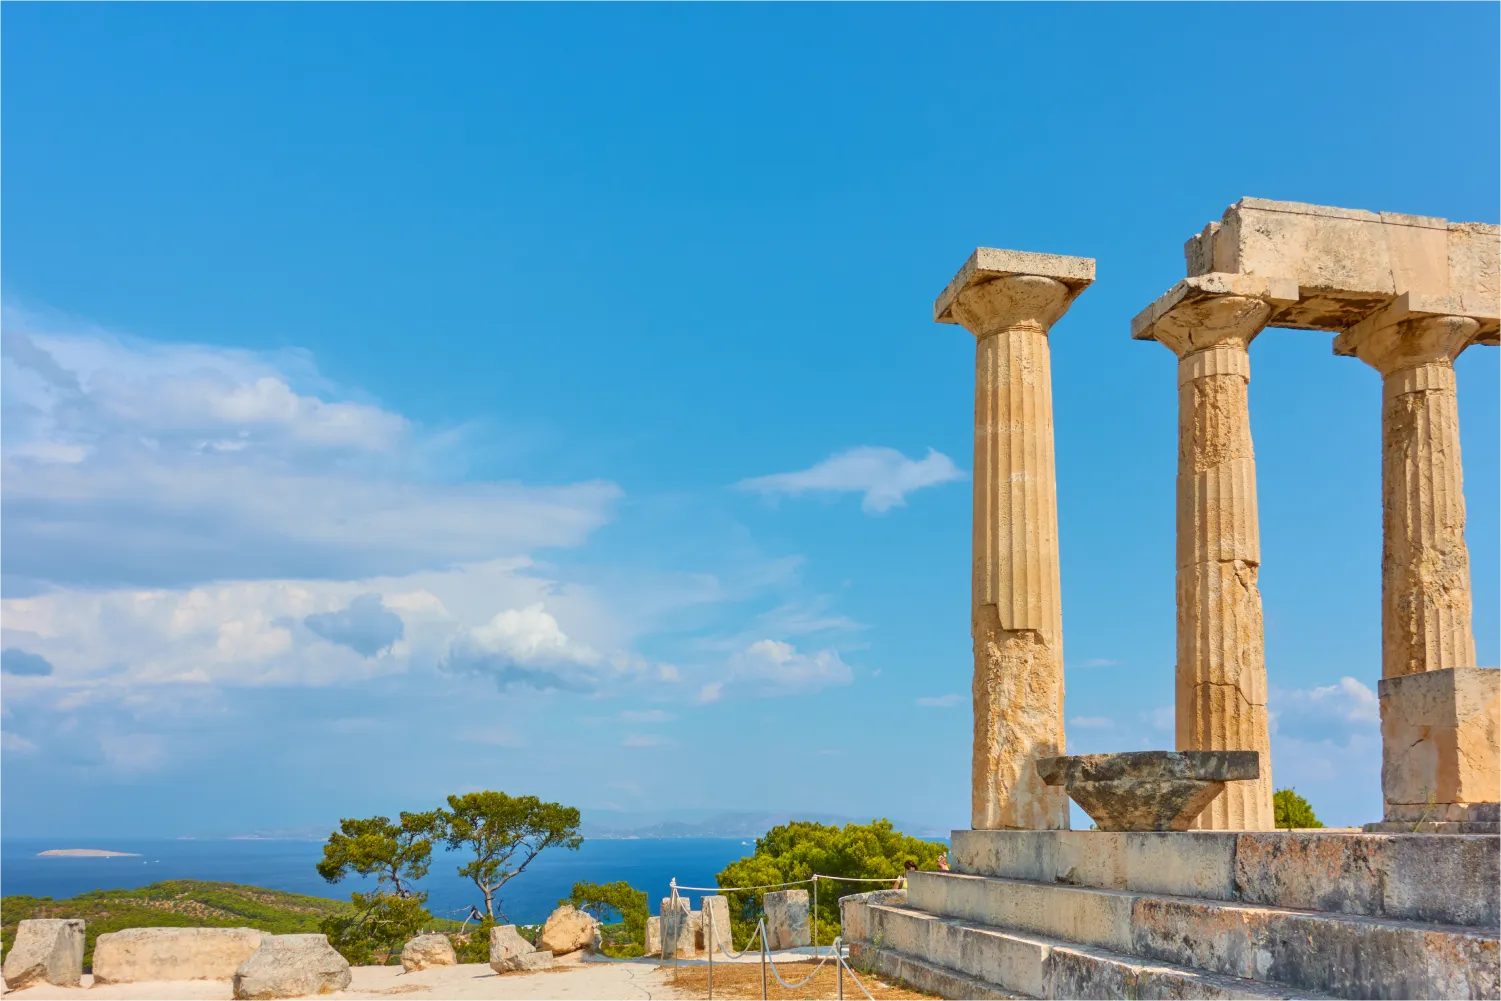 The Columns Of The Temple Of Aphaea In Aegina with the endless sky in the background